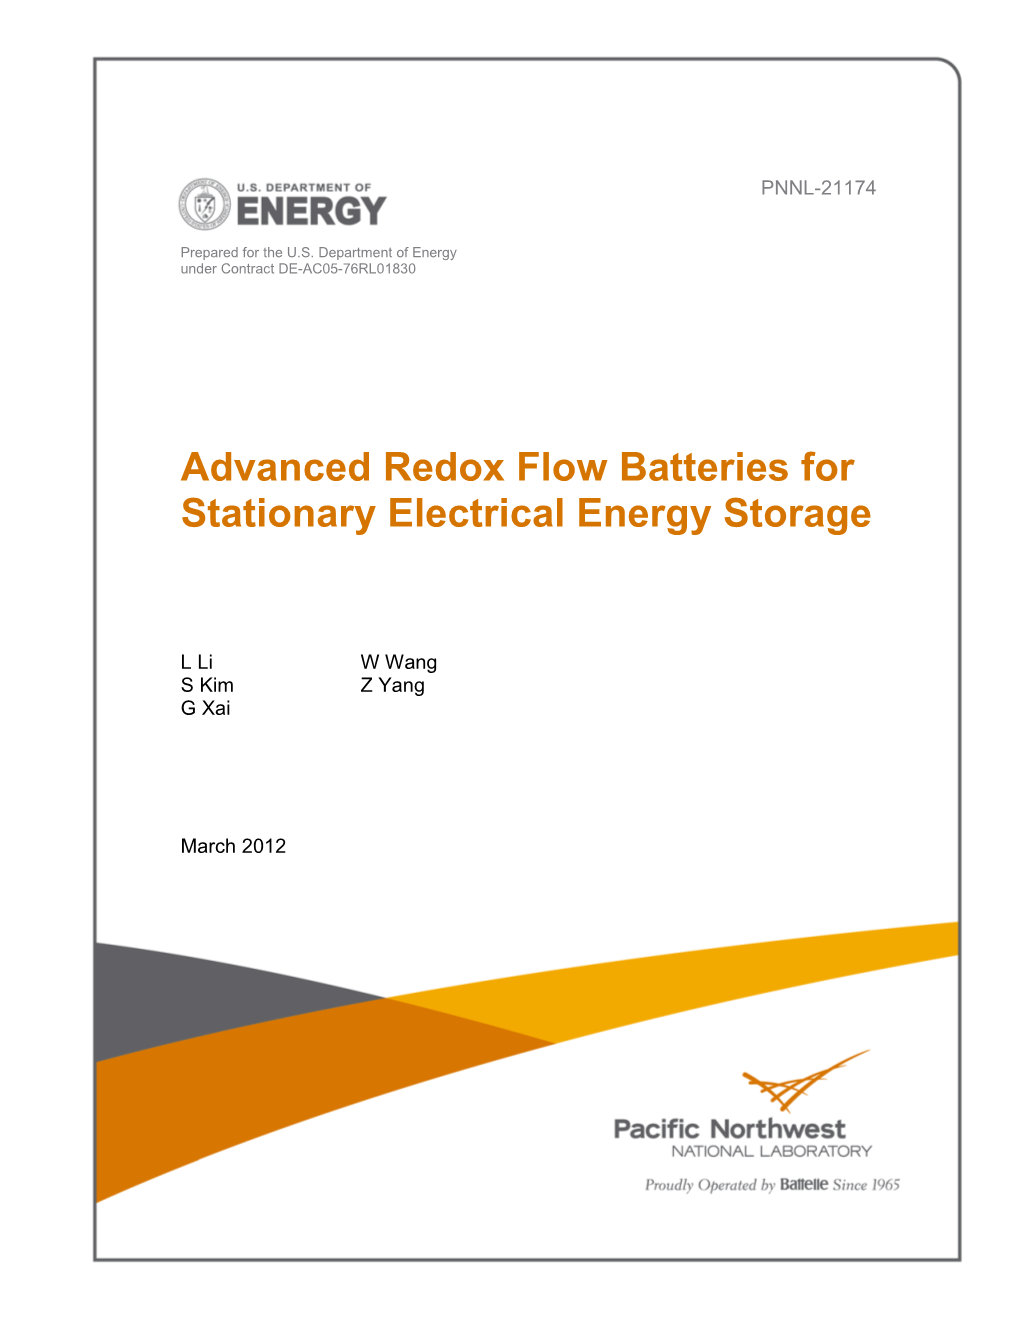 Advanced Redox Flow Batteries for Stationary Electrical Energy Storage